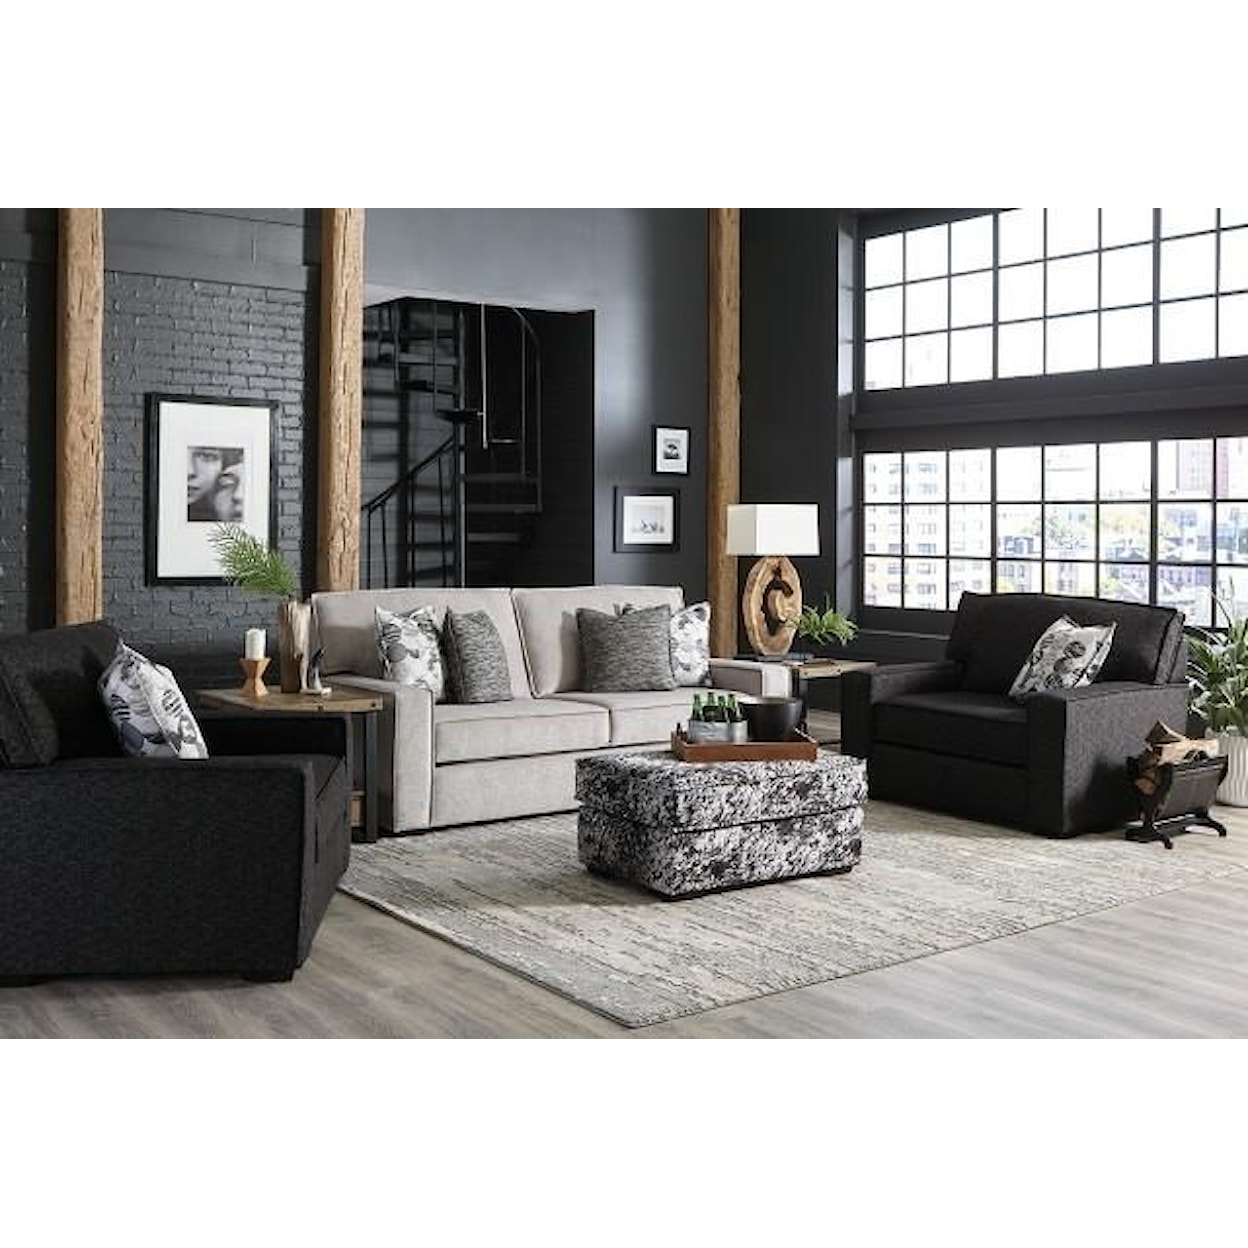 England 8L00 Series Living Room Group